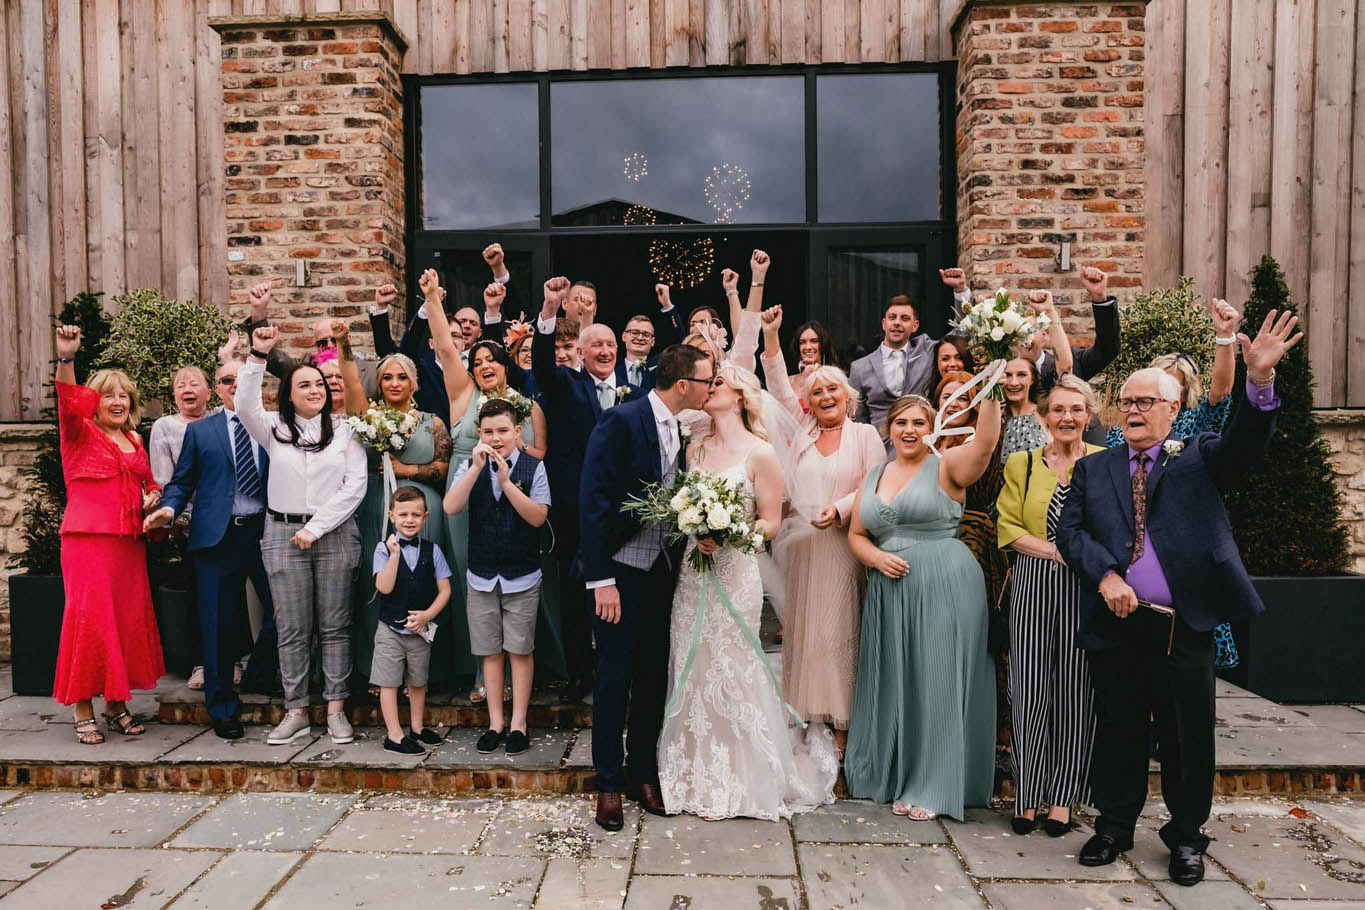 Katy and Ryan's Oakwood at Ryther wedding with lace embroidered dress and the groom wearing glasses. Credit Heather Butterworth Photography